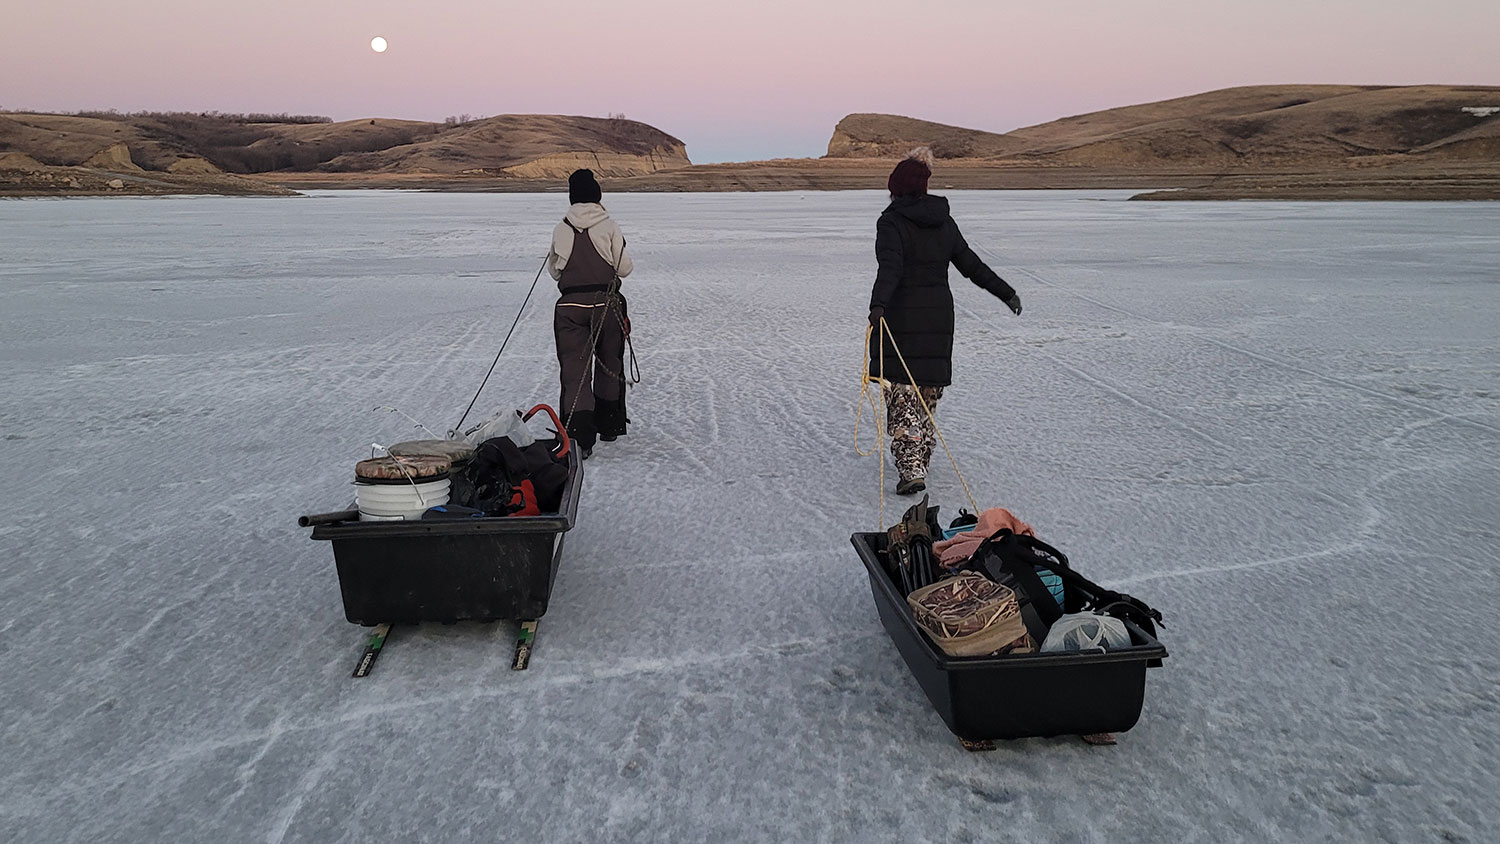 Women pulling sleds with fishing gear out on ice to go fishing